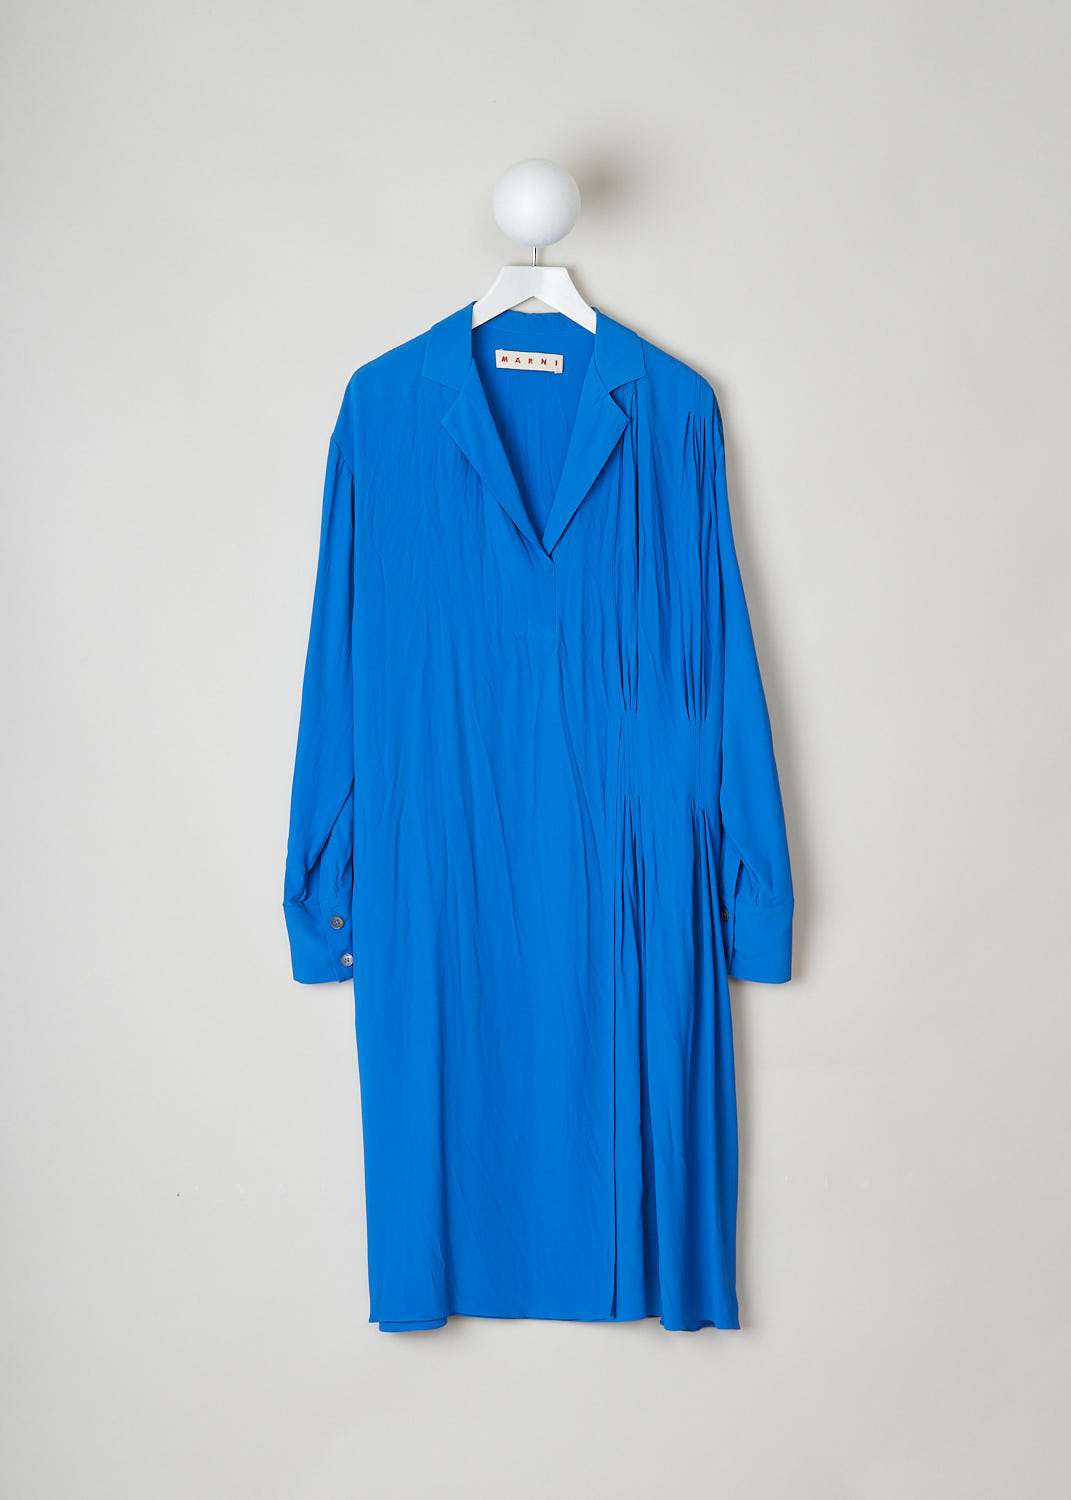 MARNI, ROYAL BLUE ASYMMETRICAL COLLAR DRESS, ABMA0171A0_TA089_00B57, Blue, Front, The royal blue dress features a notched lapel and a split neckline. The long sleeves have buttoned cuffs. The dress is mid-length and has a wider fit. A pleated detail can be found on one side and the dress has a layered skirt. 
